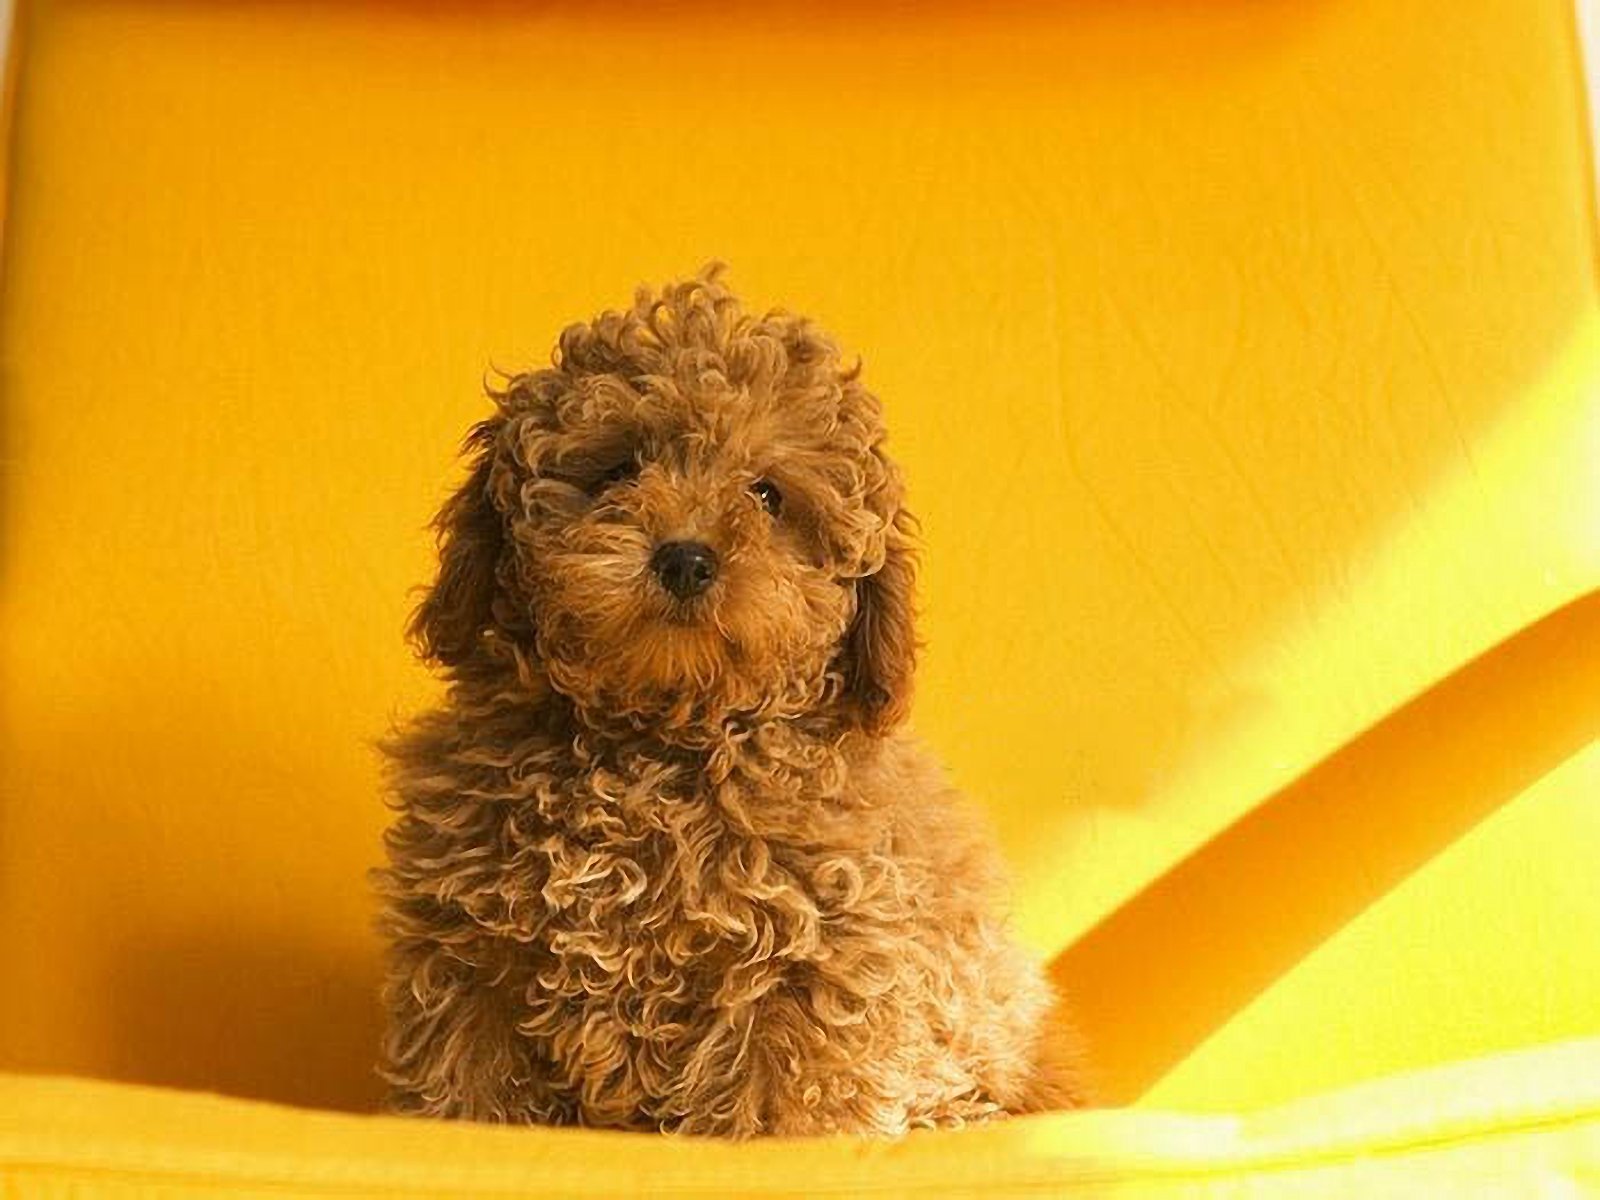 Poodle Lovely Wallpaper Pictures